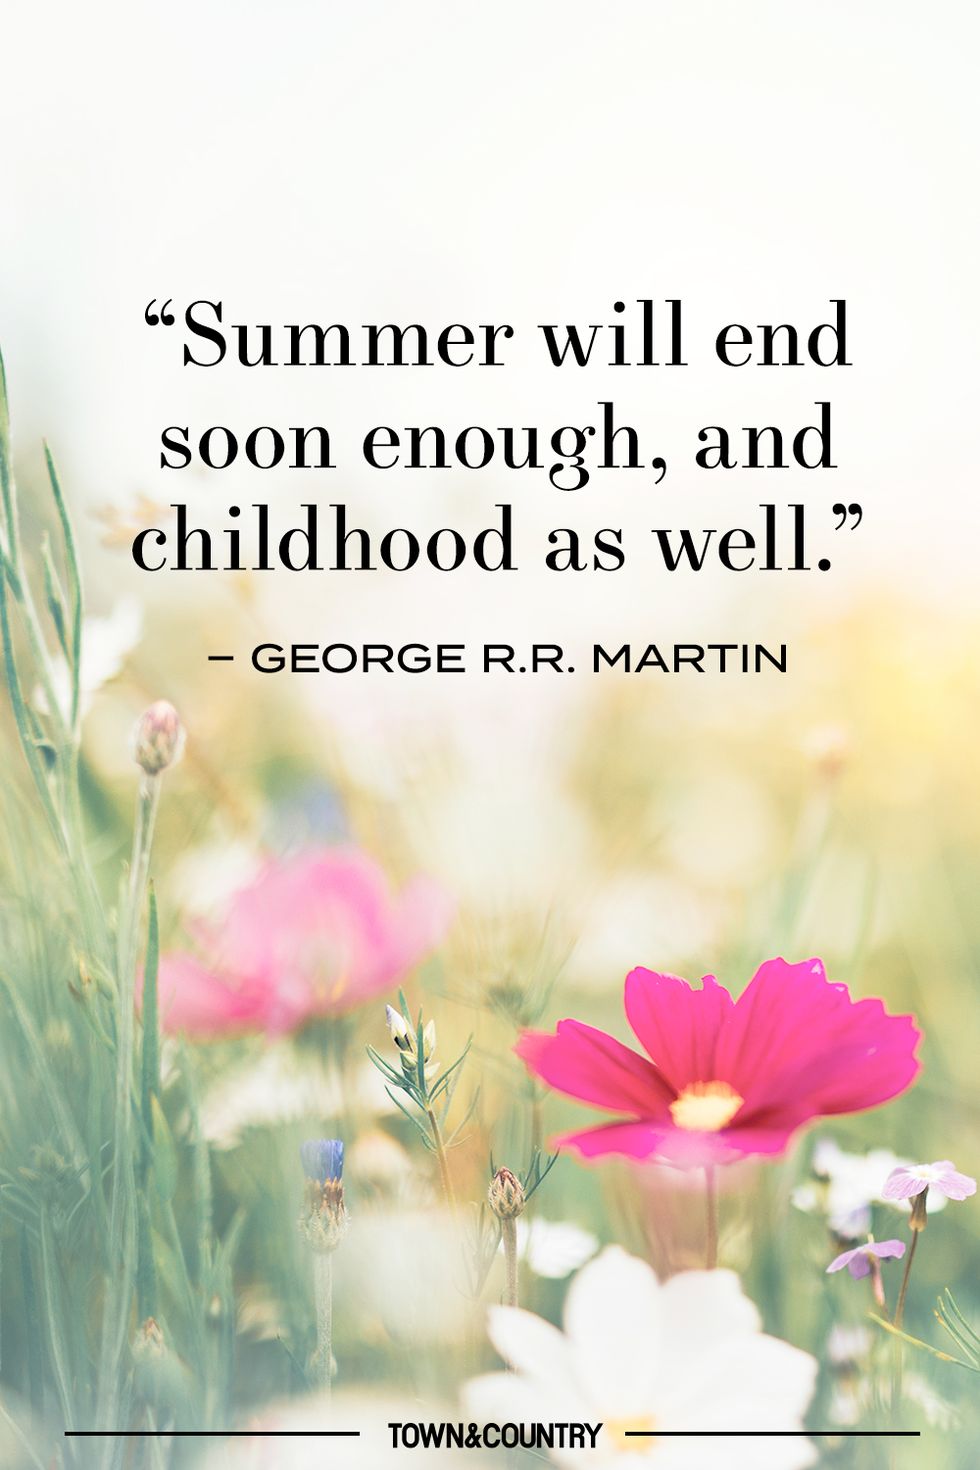 30+ Best End of Summer Quotes - Beautiful Quotes About the Last Days of ...